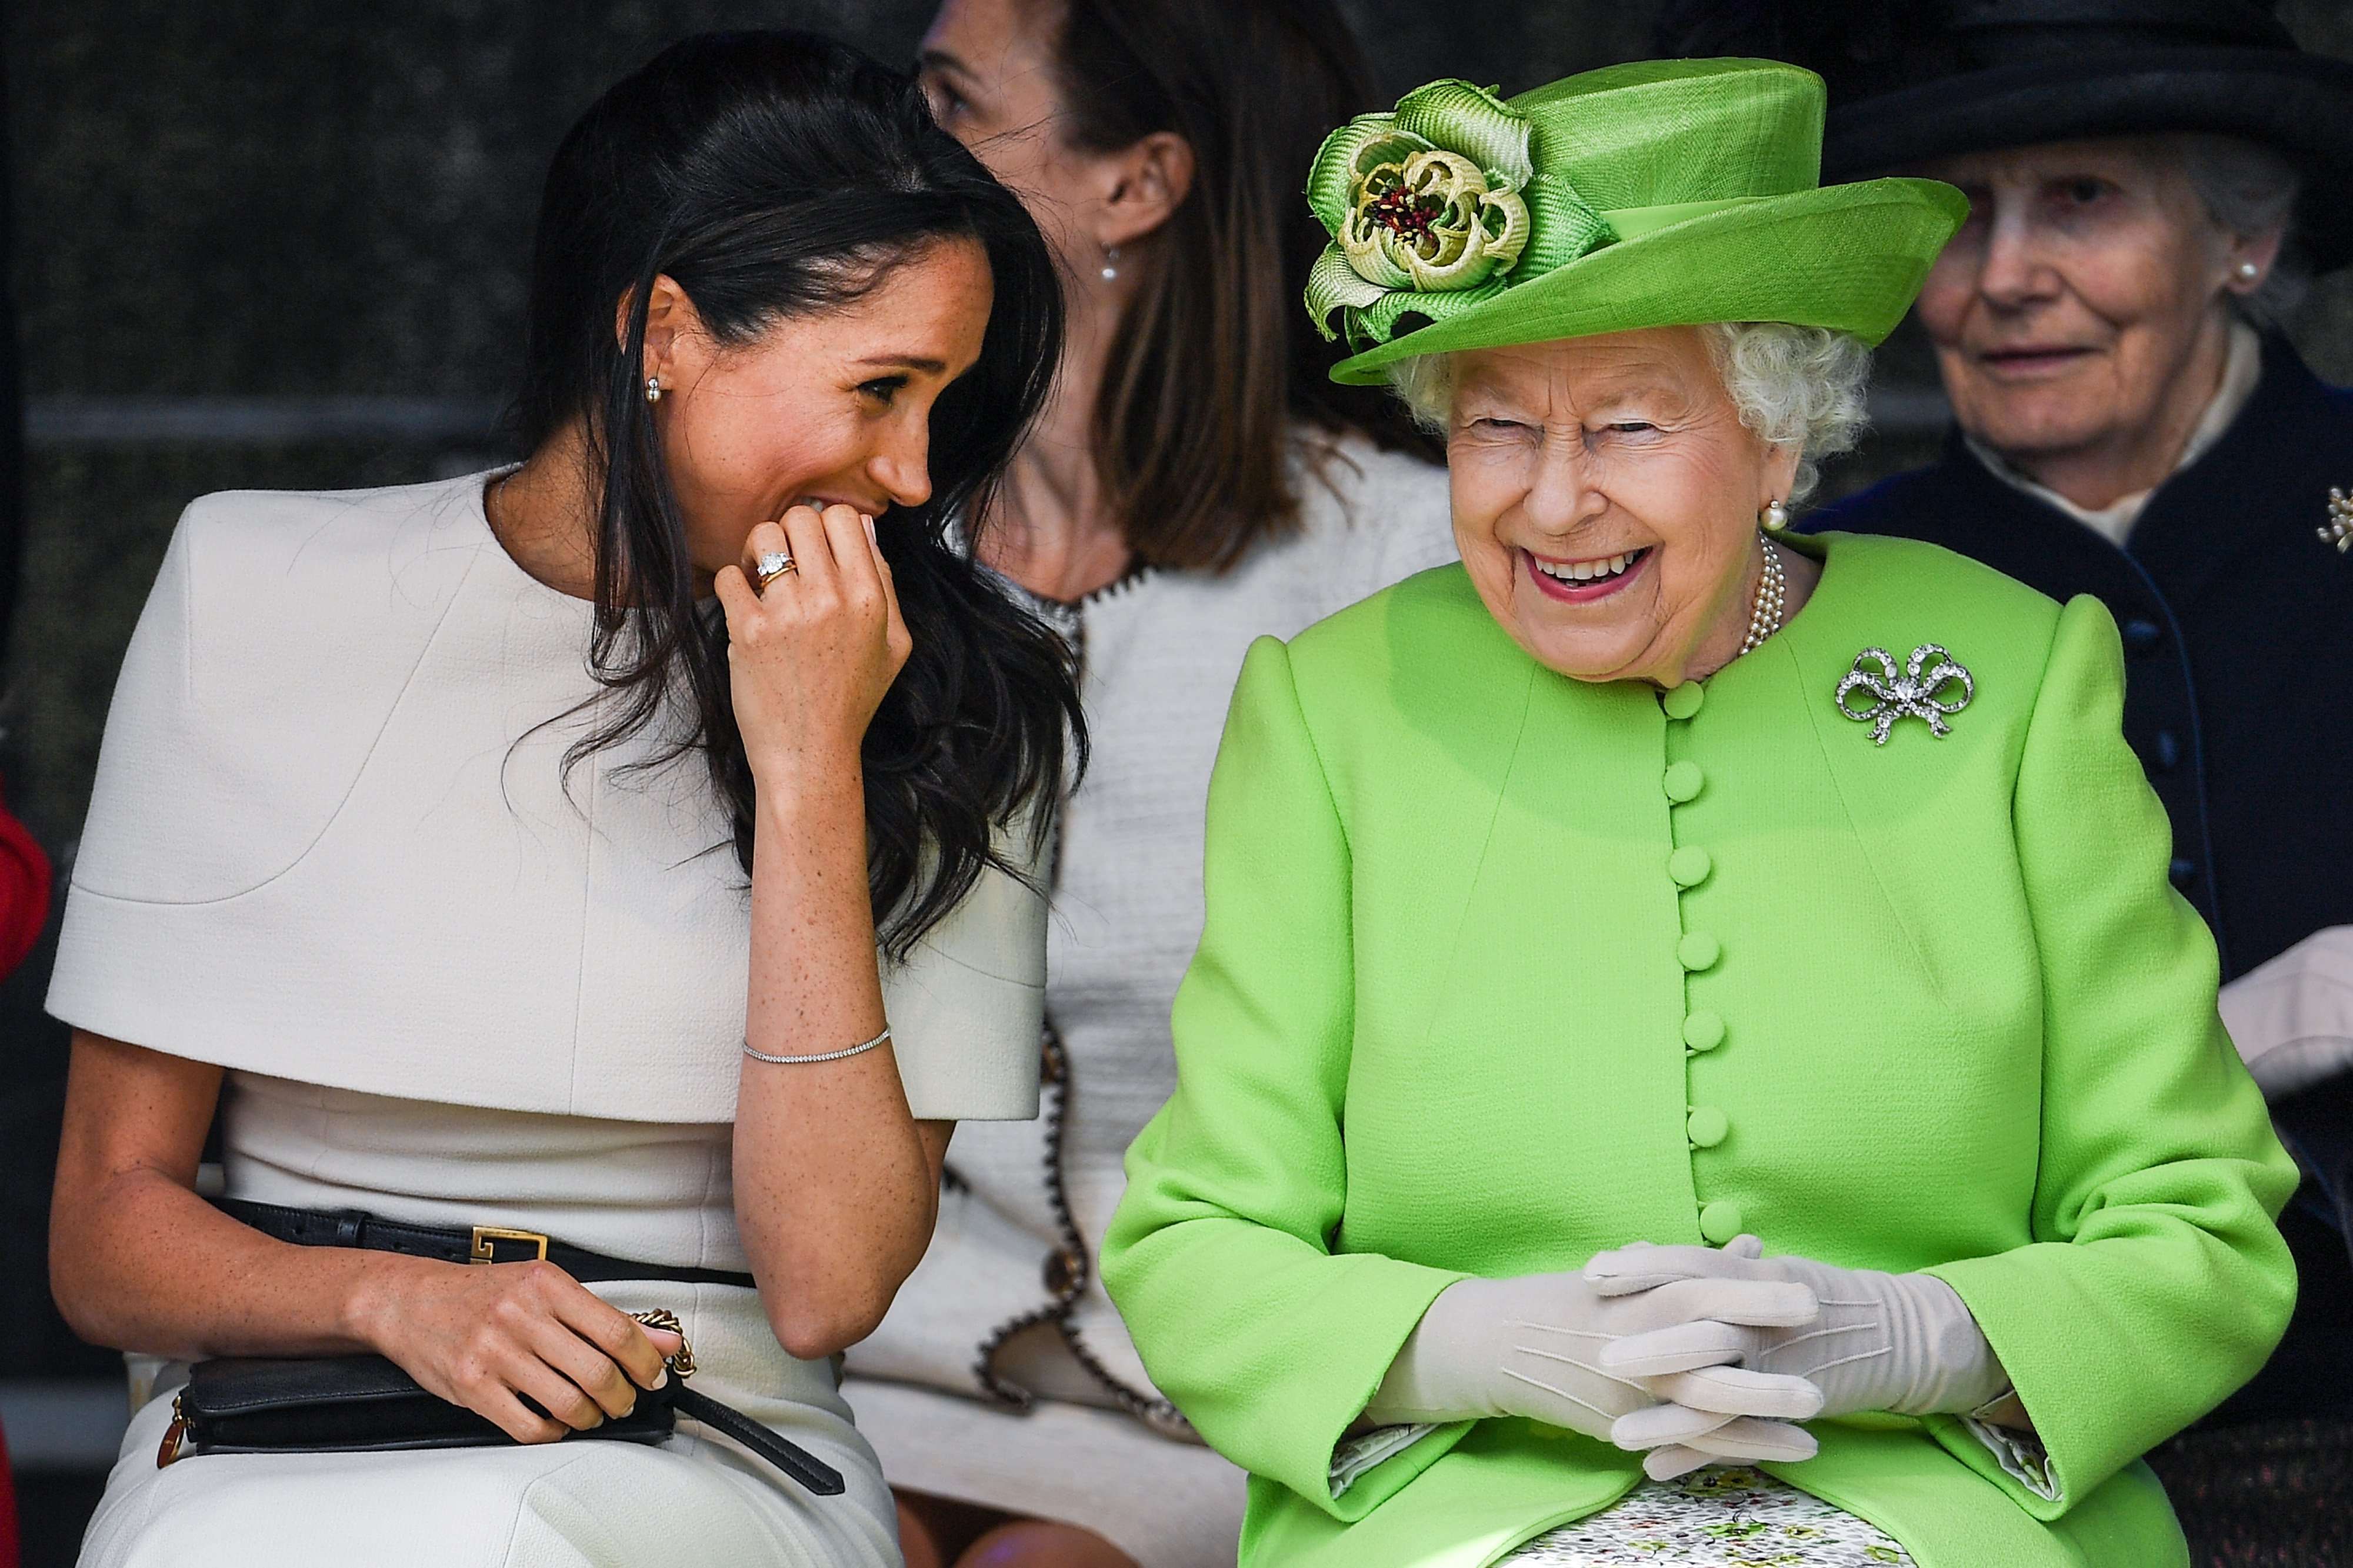 Queen Elizabeth II pictured sitting and laughing with Meghan, Duchess of Sussex during a ceremony to open the new Mersey Gateway Bridge on June 14, 2018 in Halton, Cheshire, England. / Source: Getty Images